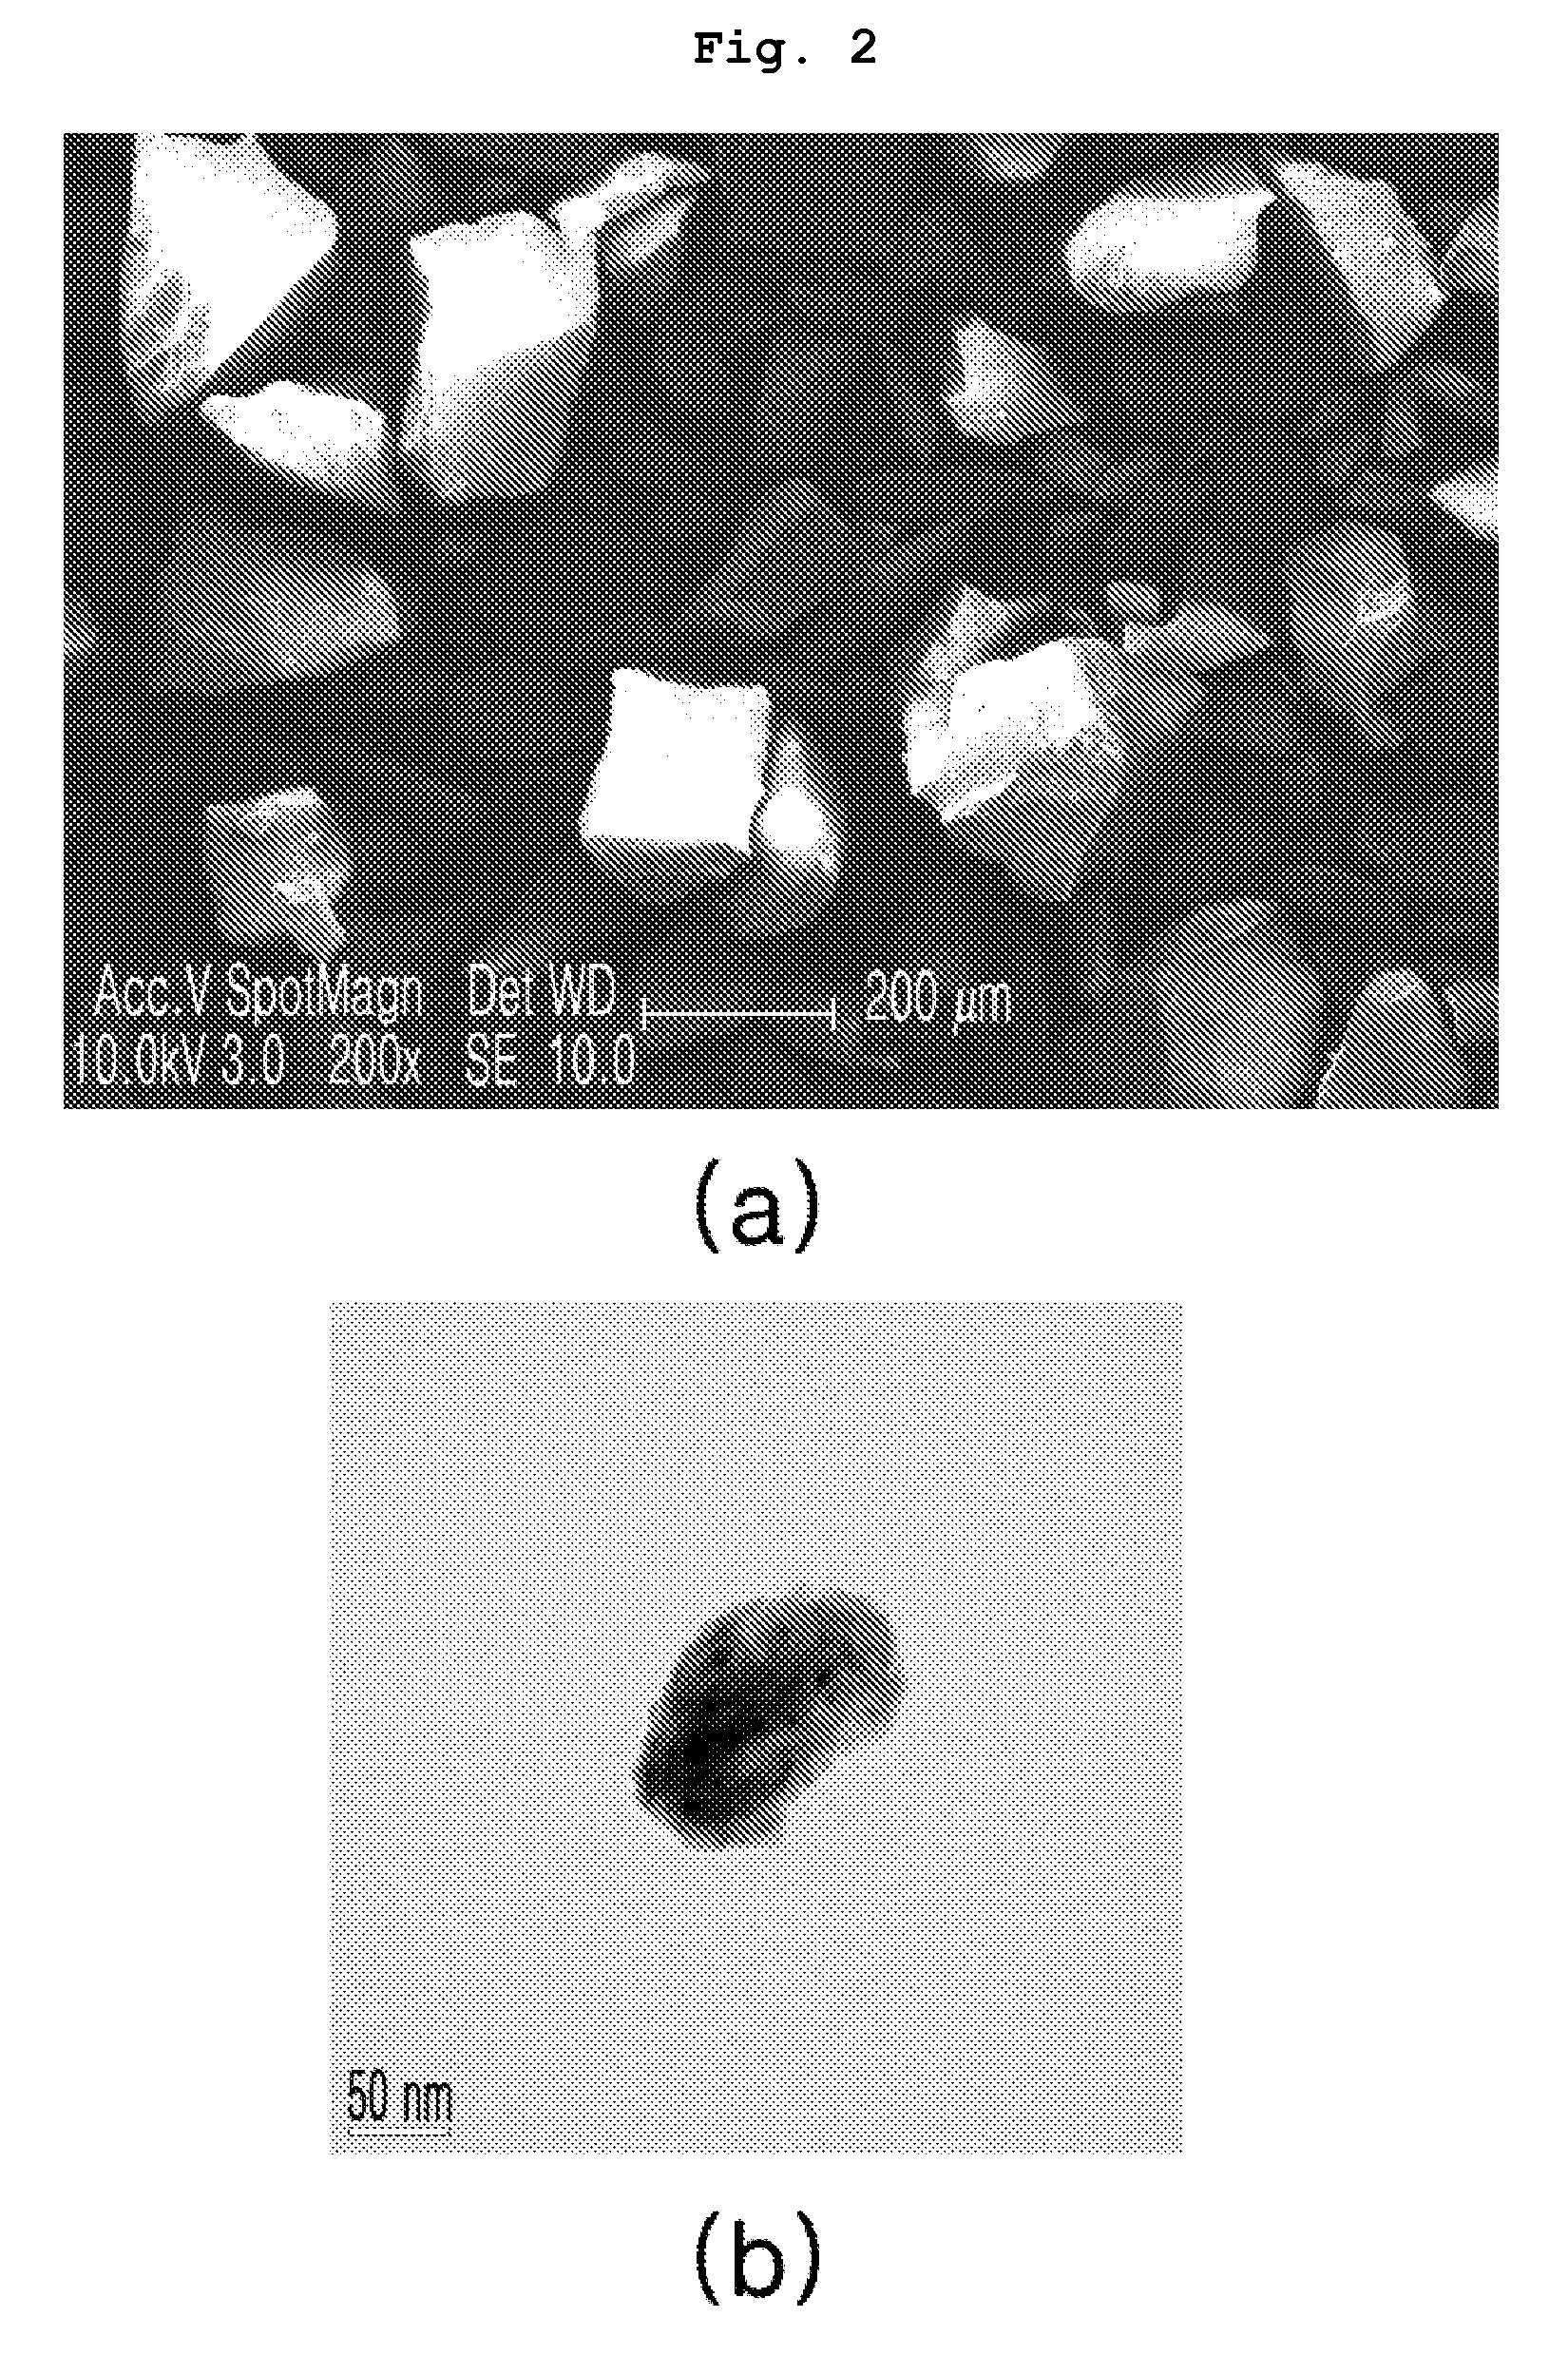 Radiation shielding members including nano-particles as a radiation shielding material and method for preparing the same